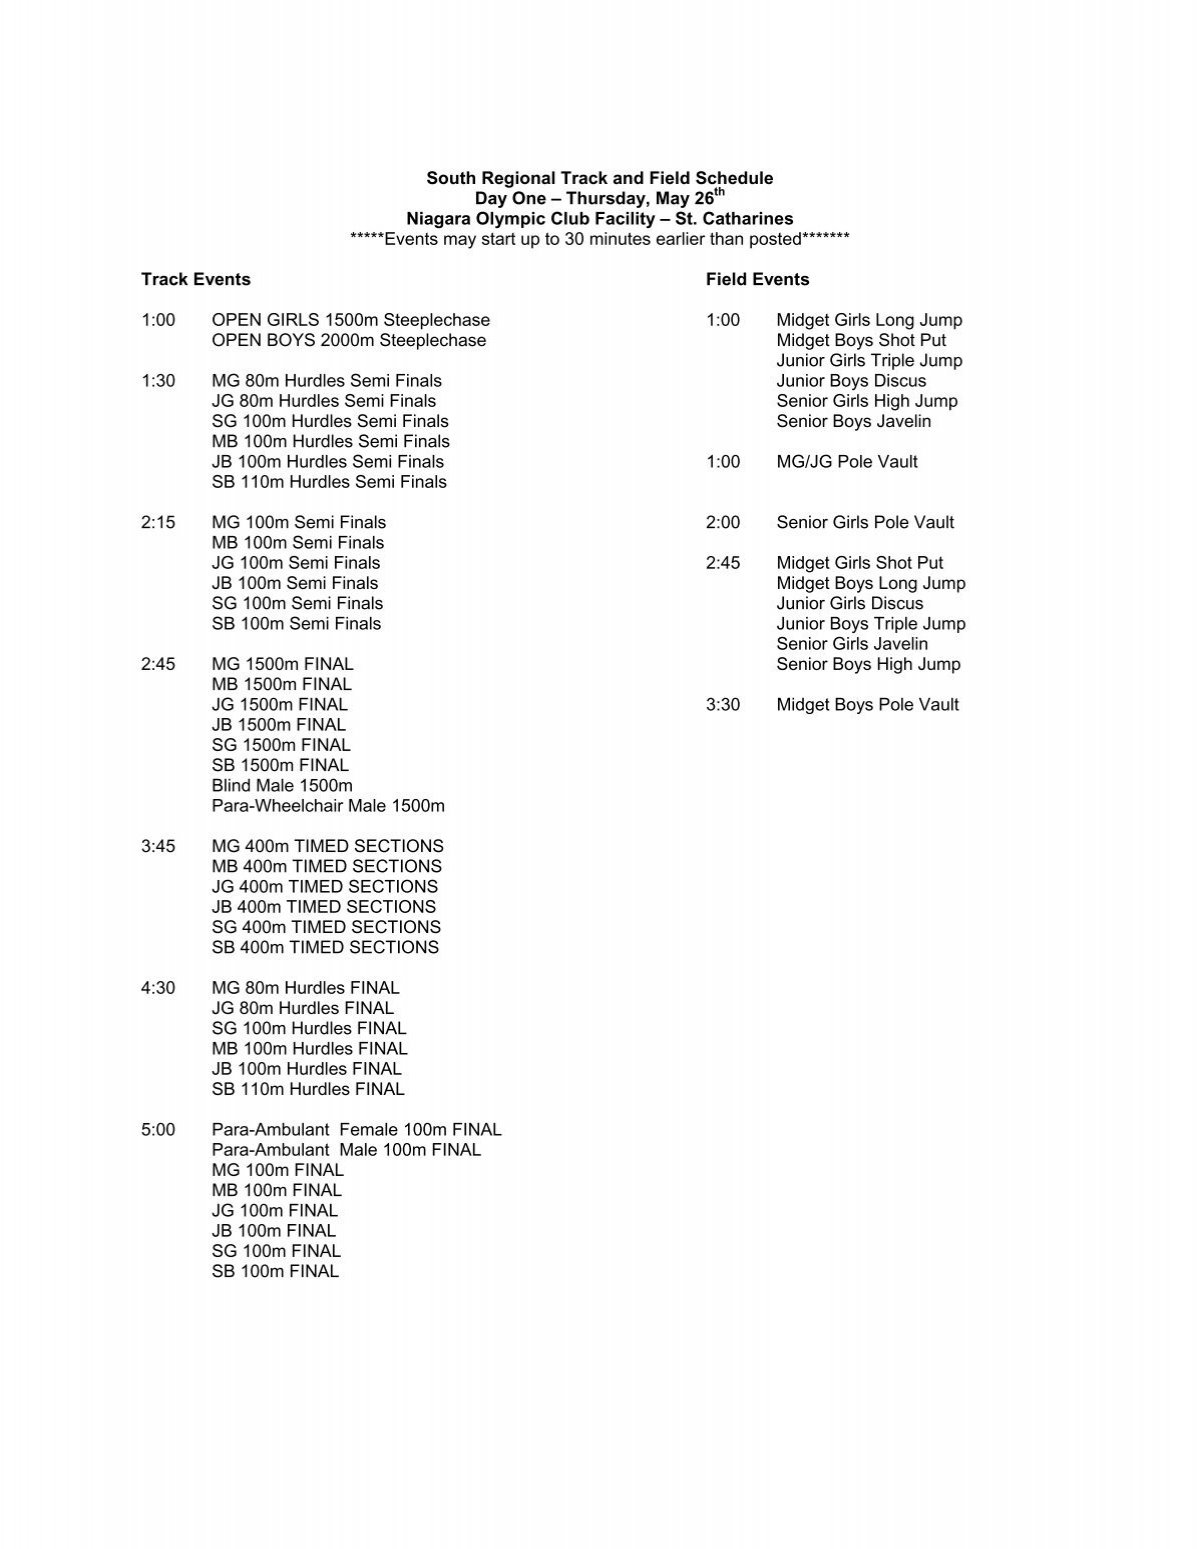 South Regional Track and Field Schedule Day One - XCRunner